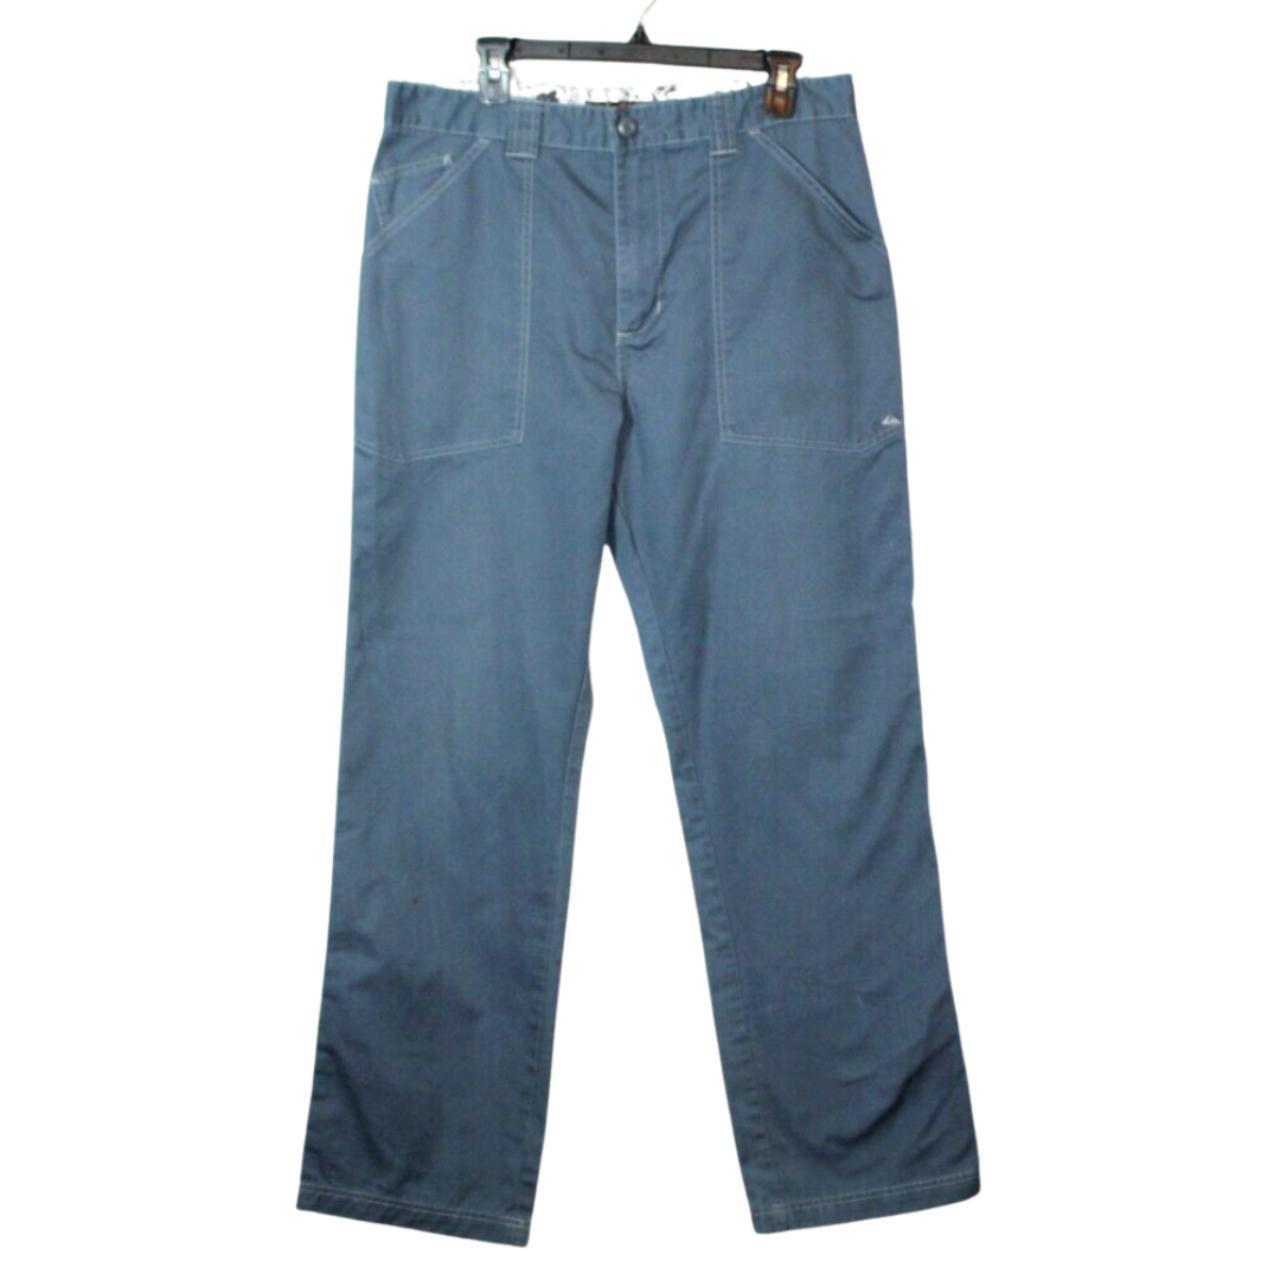 Product Image 1 - Vintage 90s Quiksilver mens chino